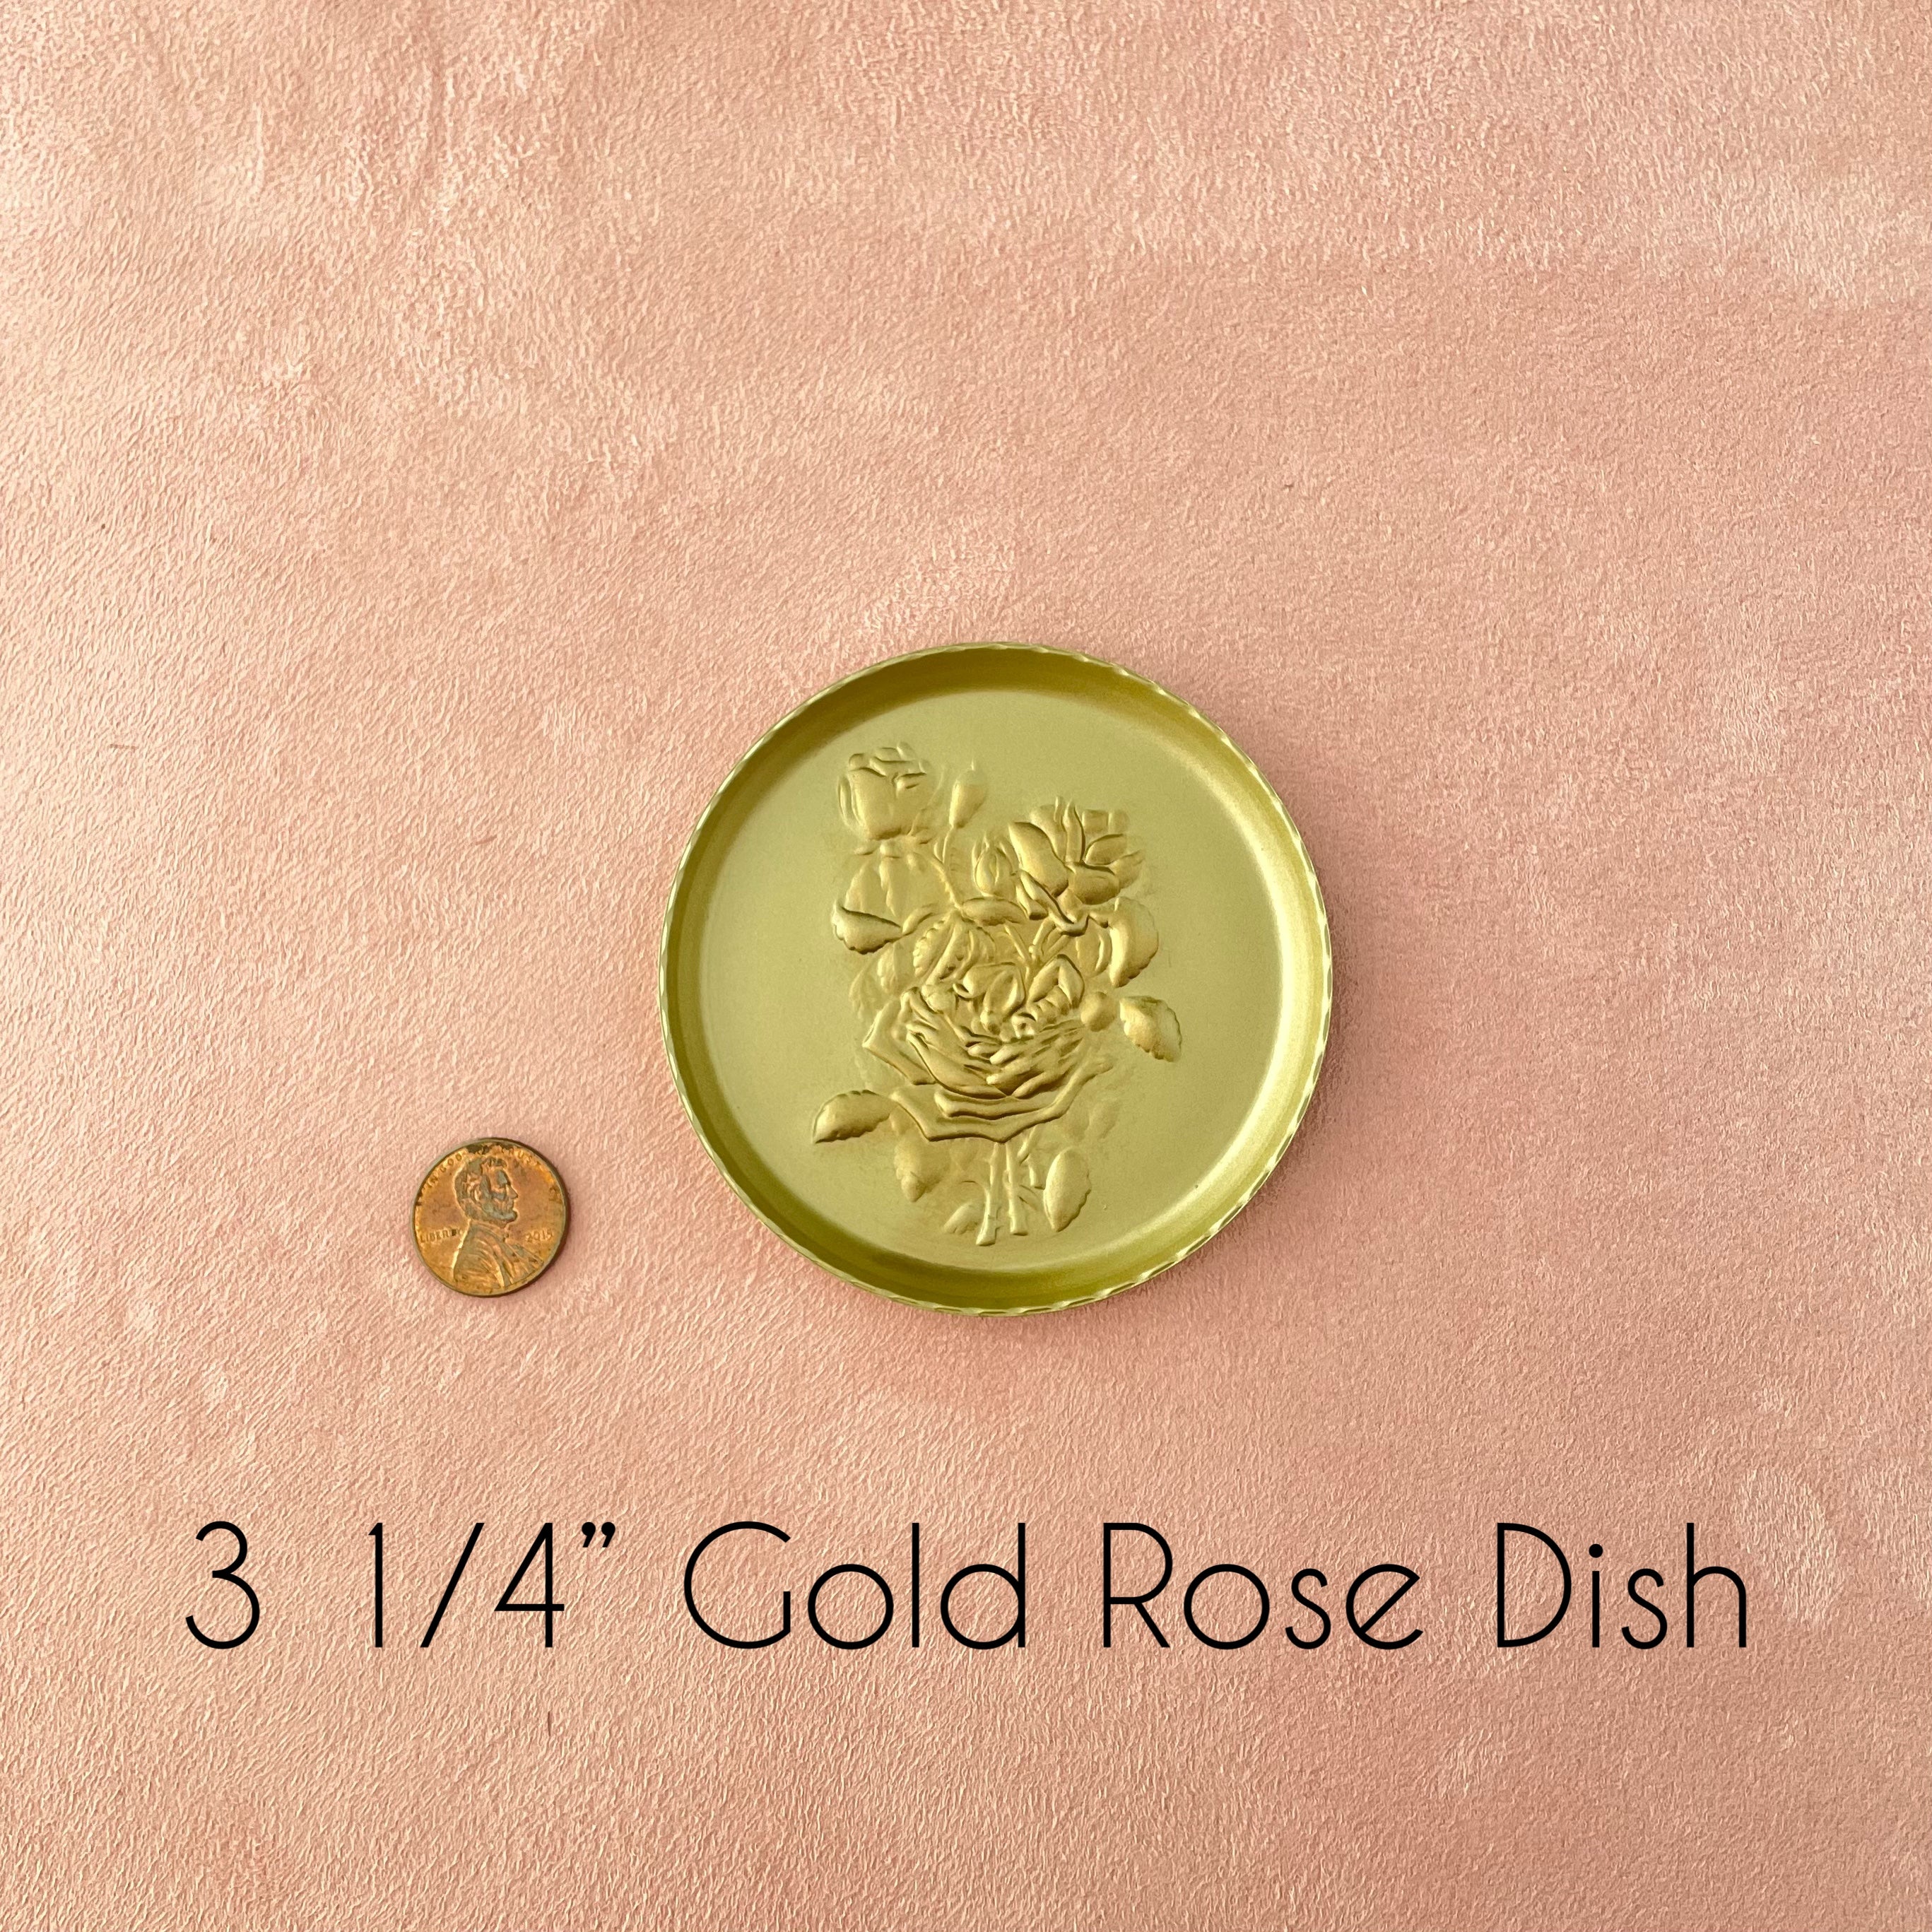 3 ¼ inch gold rose dish, penny beside for size reference - Wedding Flat lay props from Champagne & GRIT